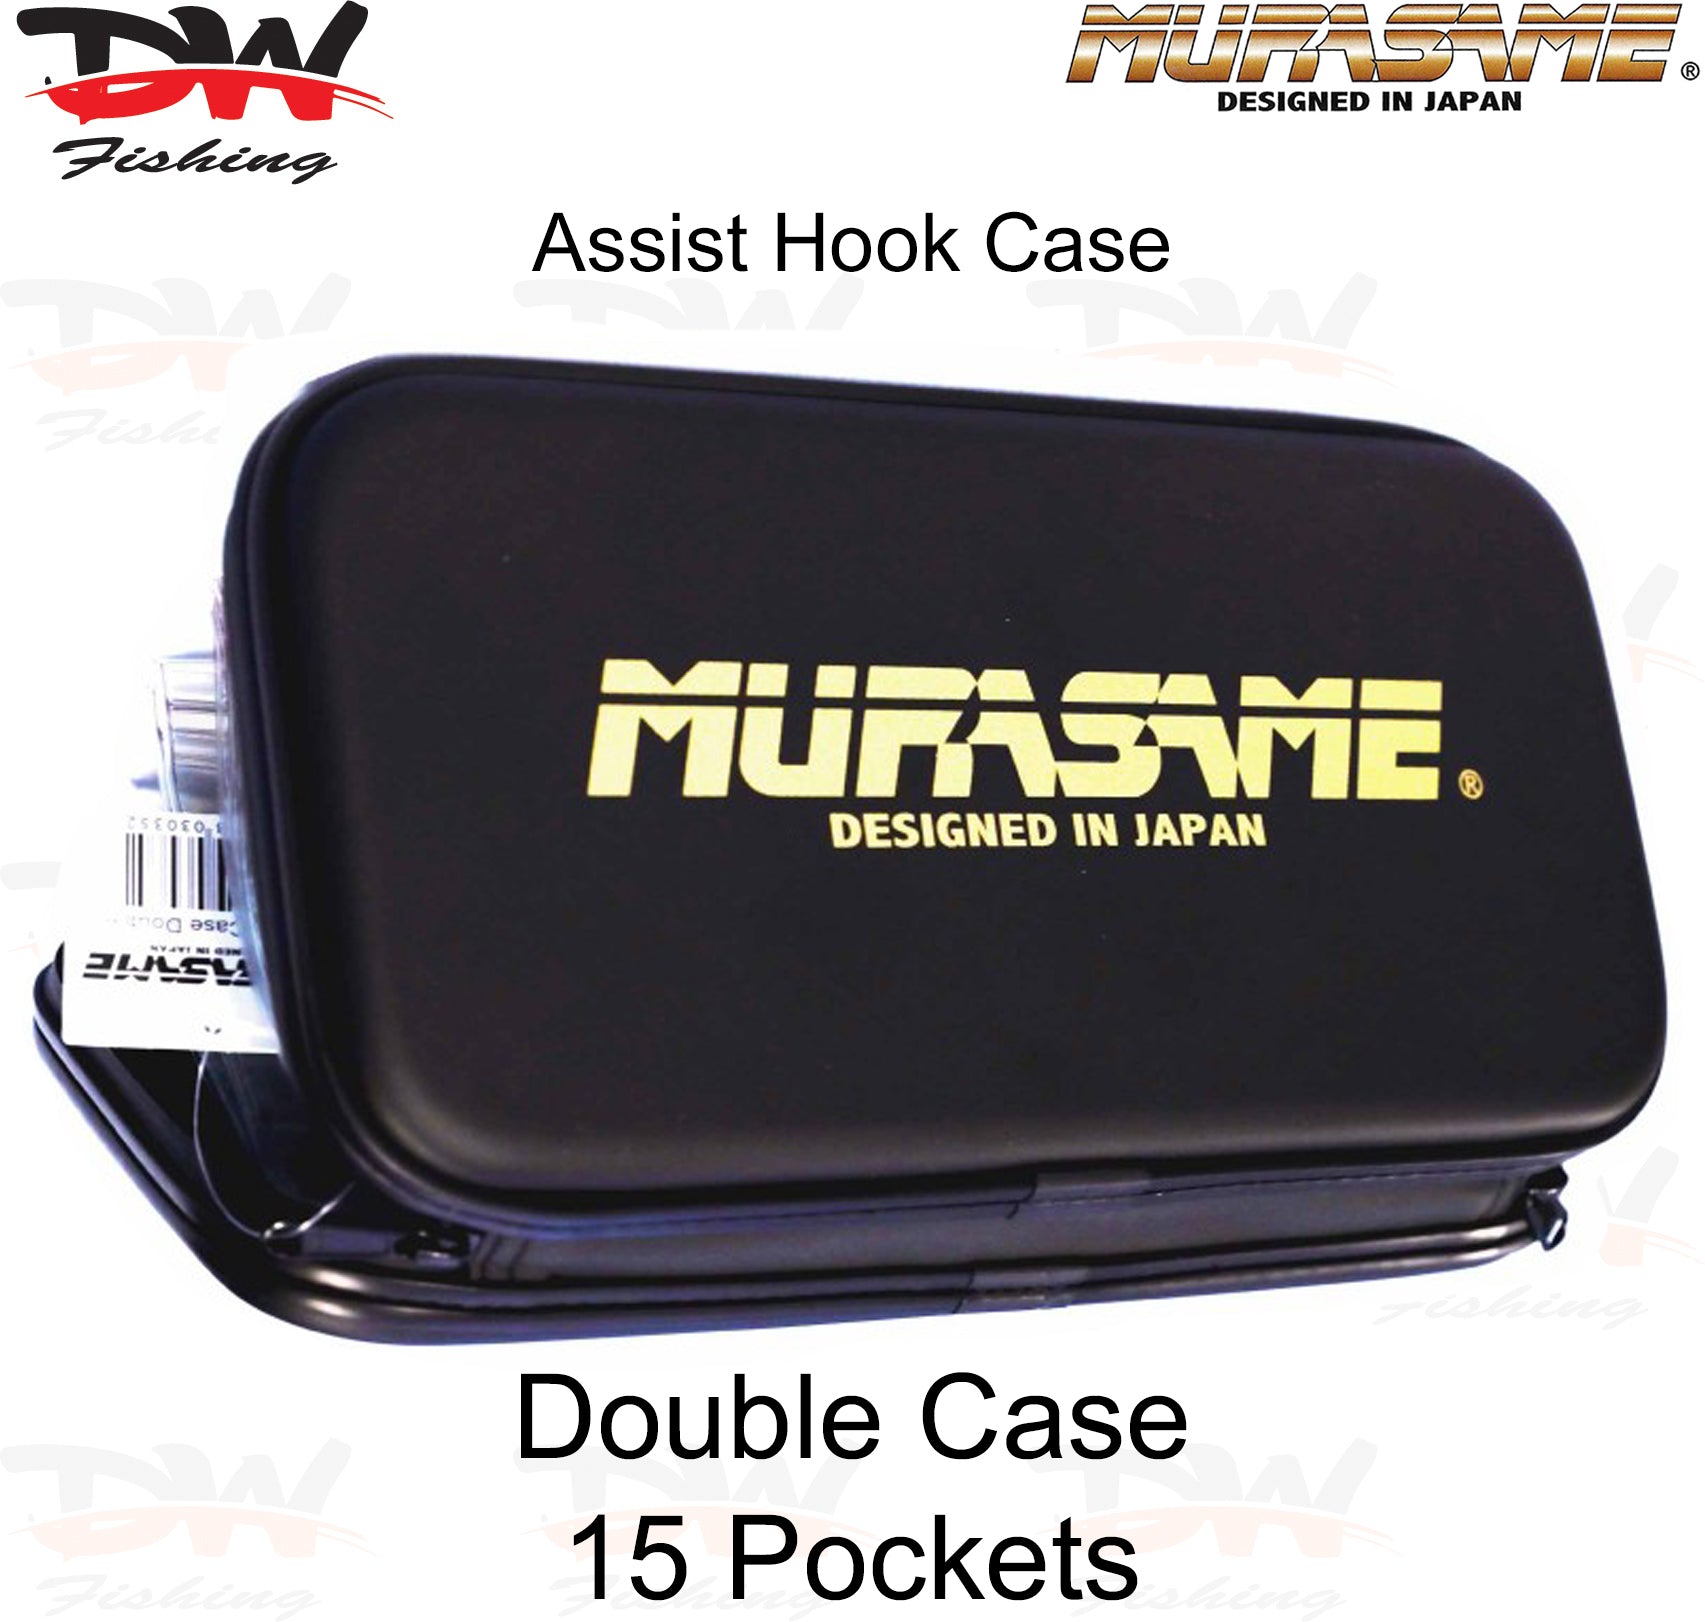 Murasame assist hook case size Double open case picture with brand and pocket QTY